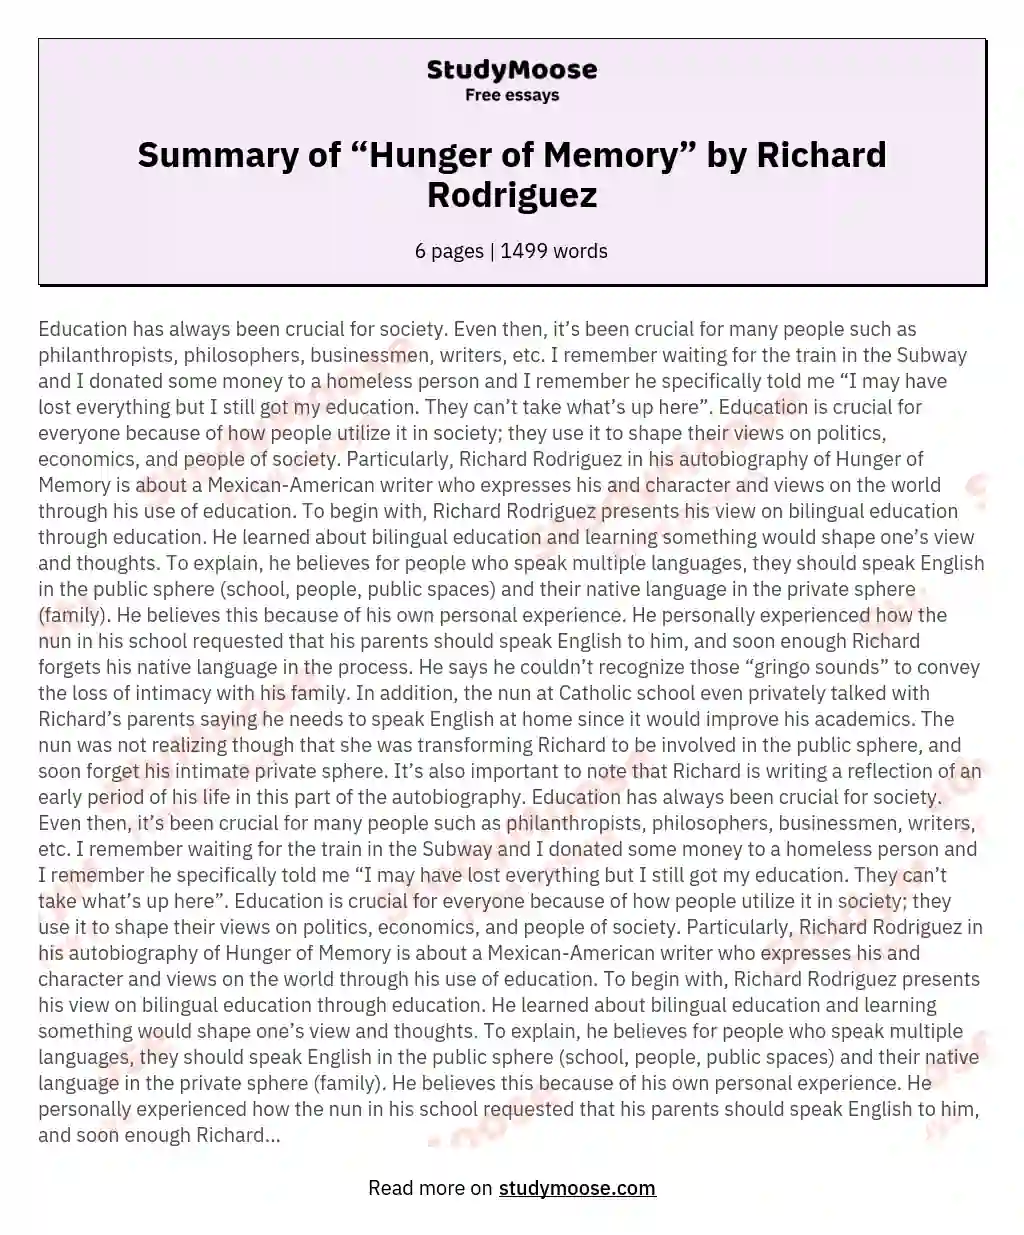 Summary of “Hunger of Memory” by Richard Rodriguez essay